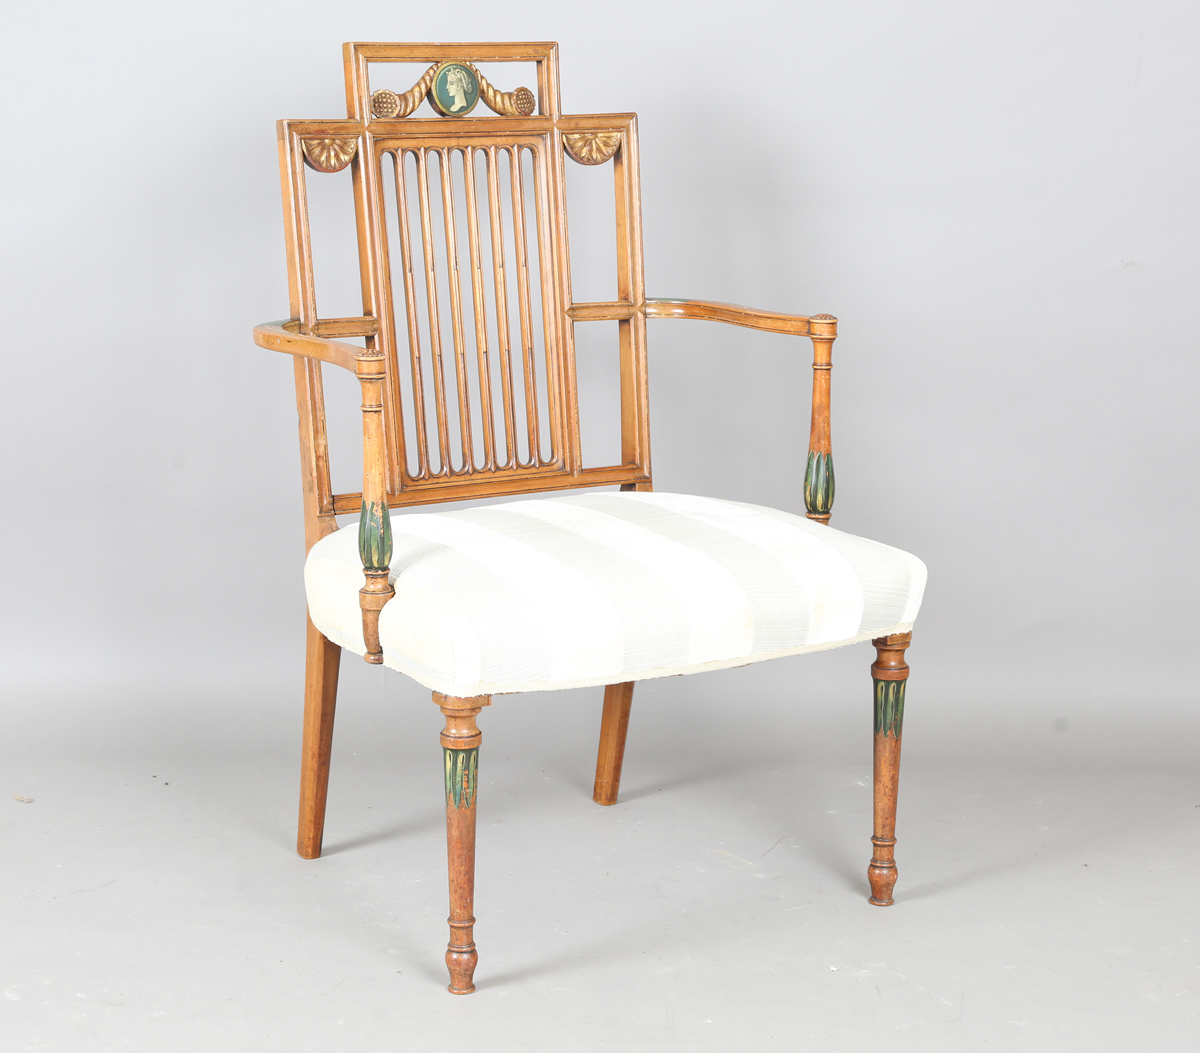 An early 20th century Neoclassical Revival satin walnut armchair, painted with portrait medallion